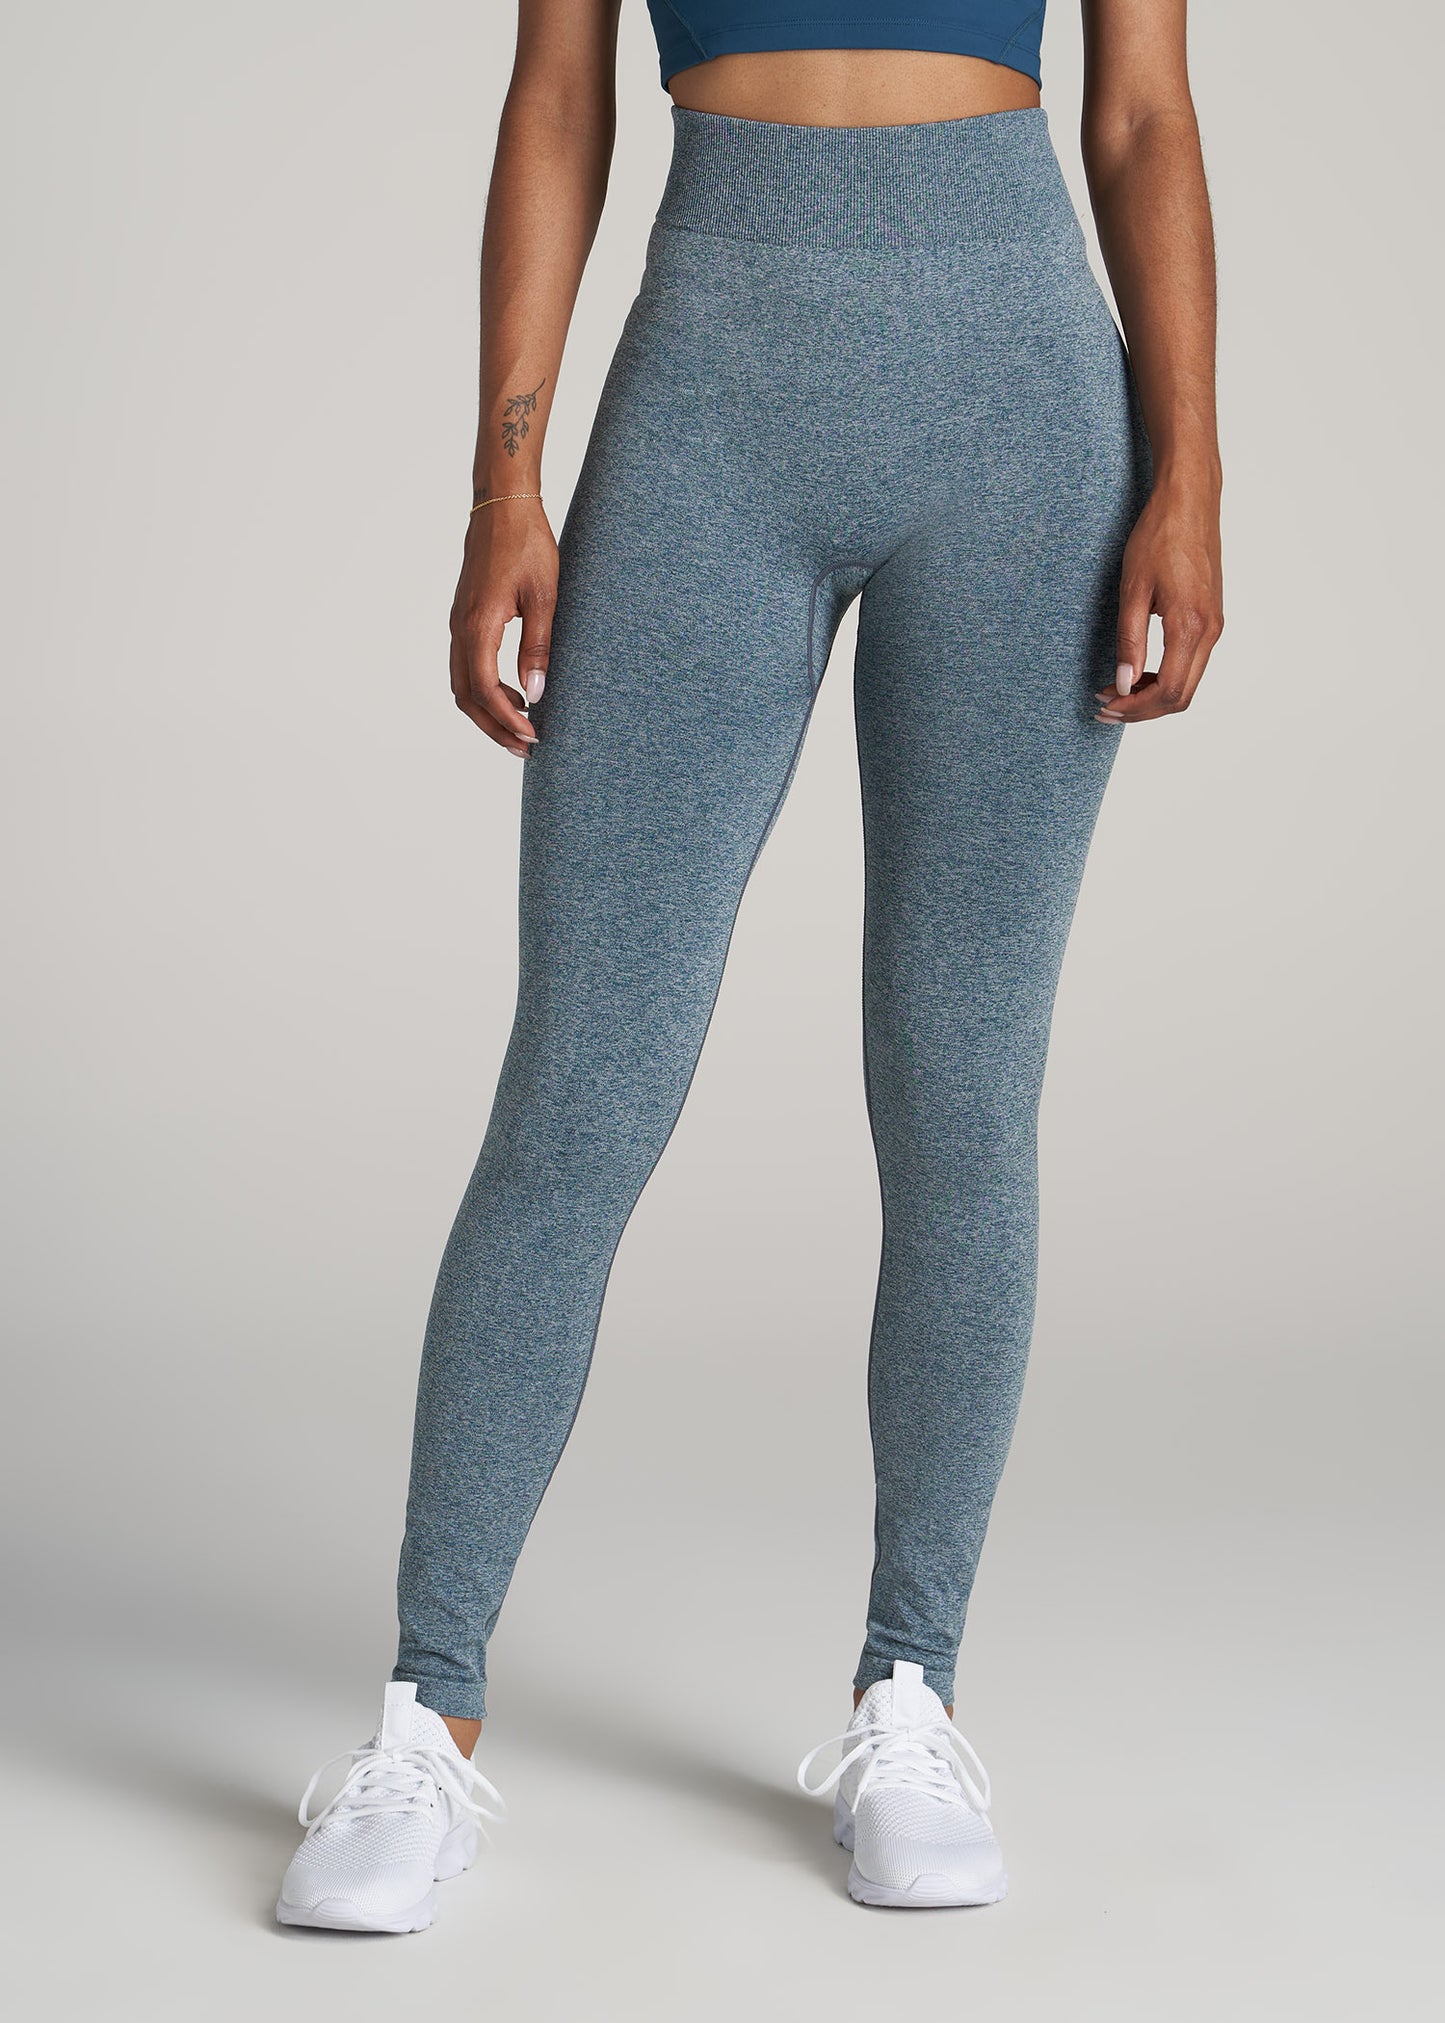 Best Deal for Womens Sweatpants Comfy High Waisted Seamless Leggings